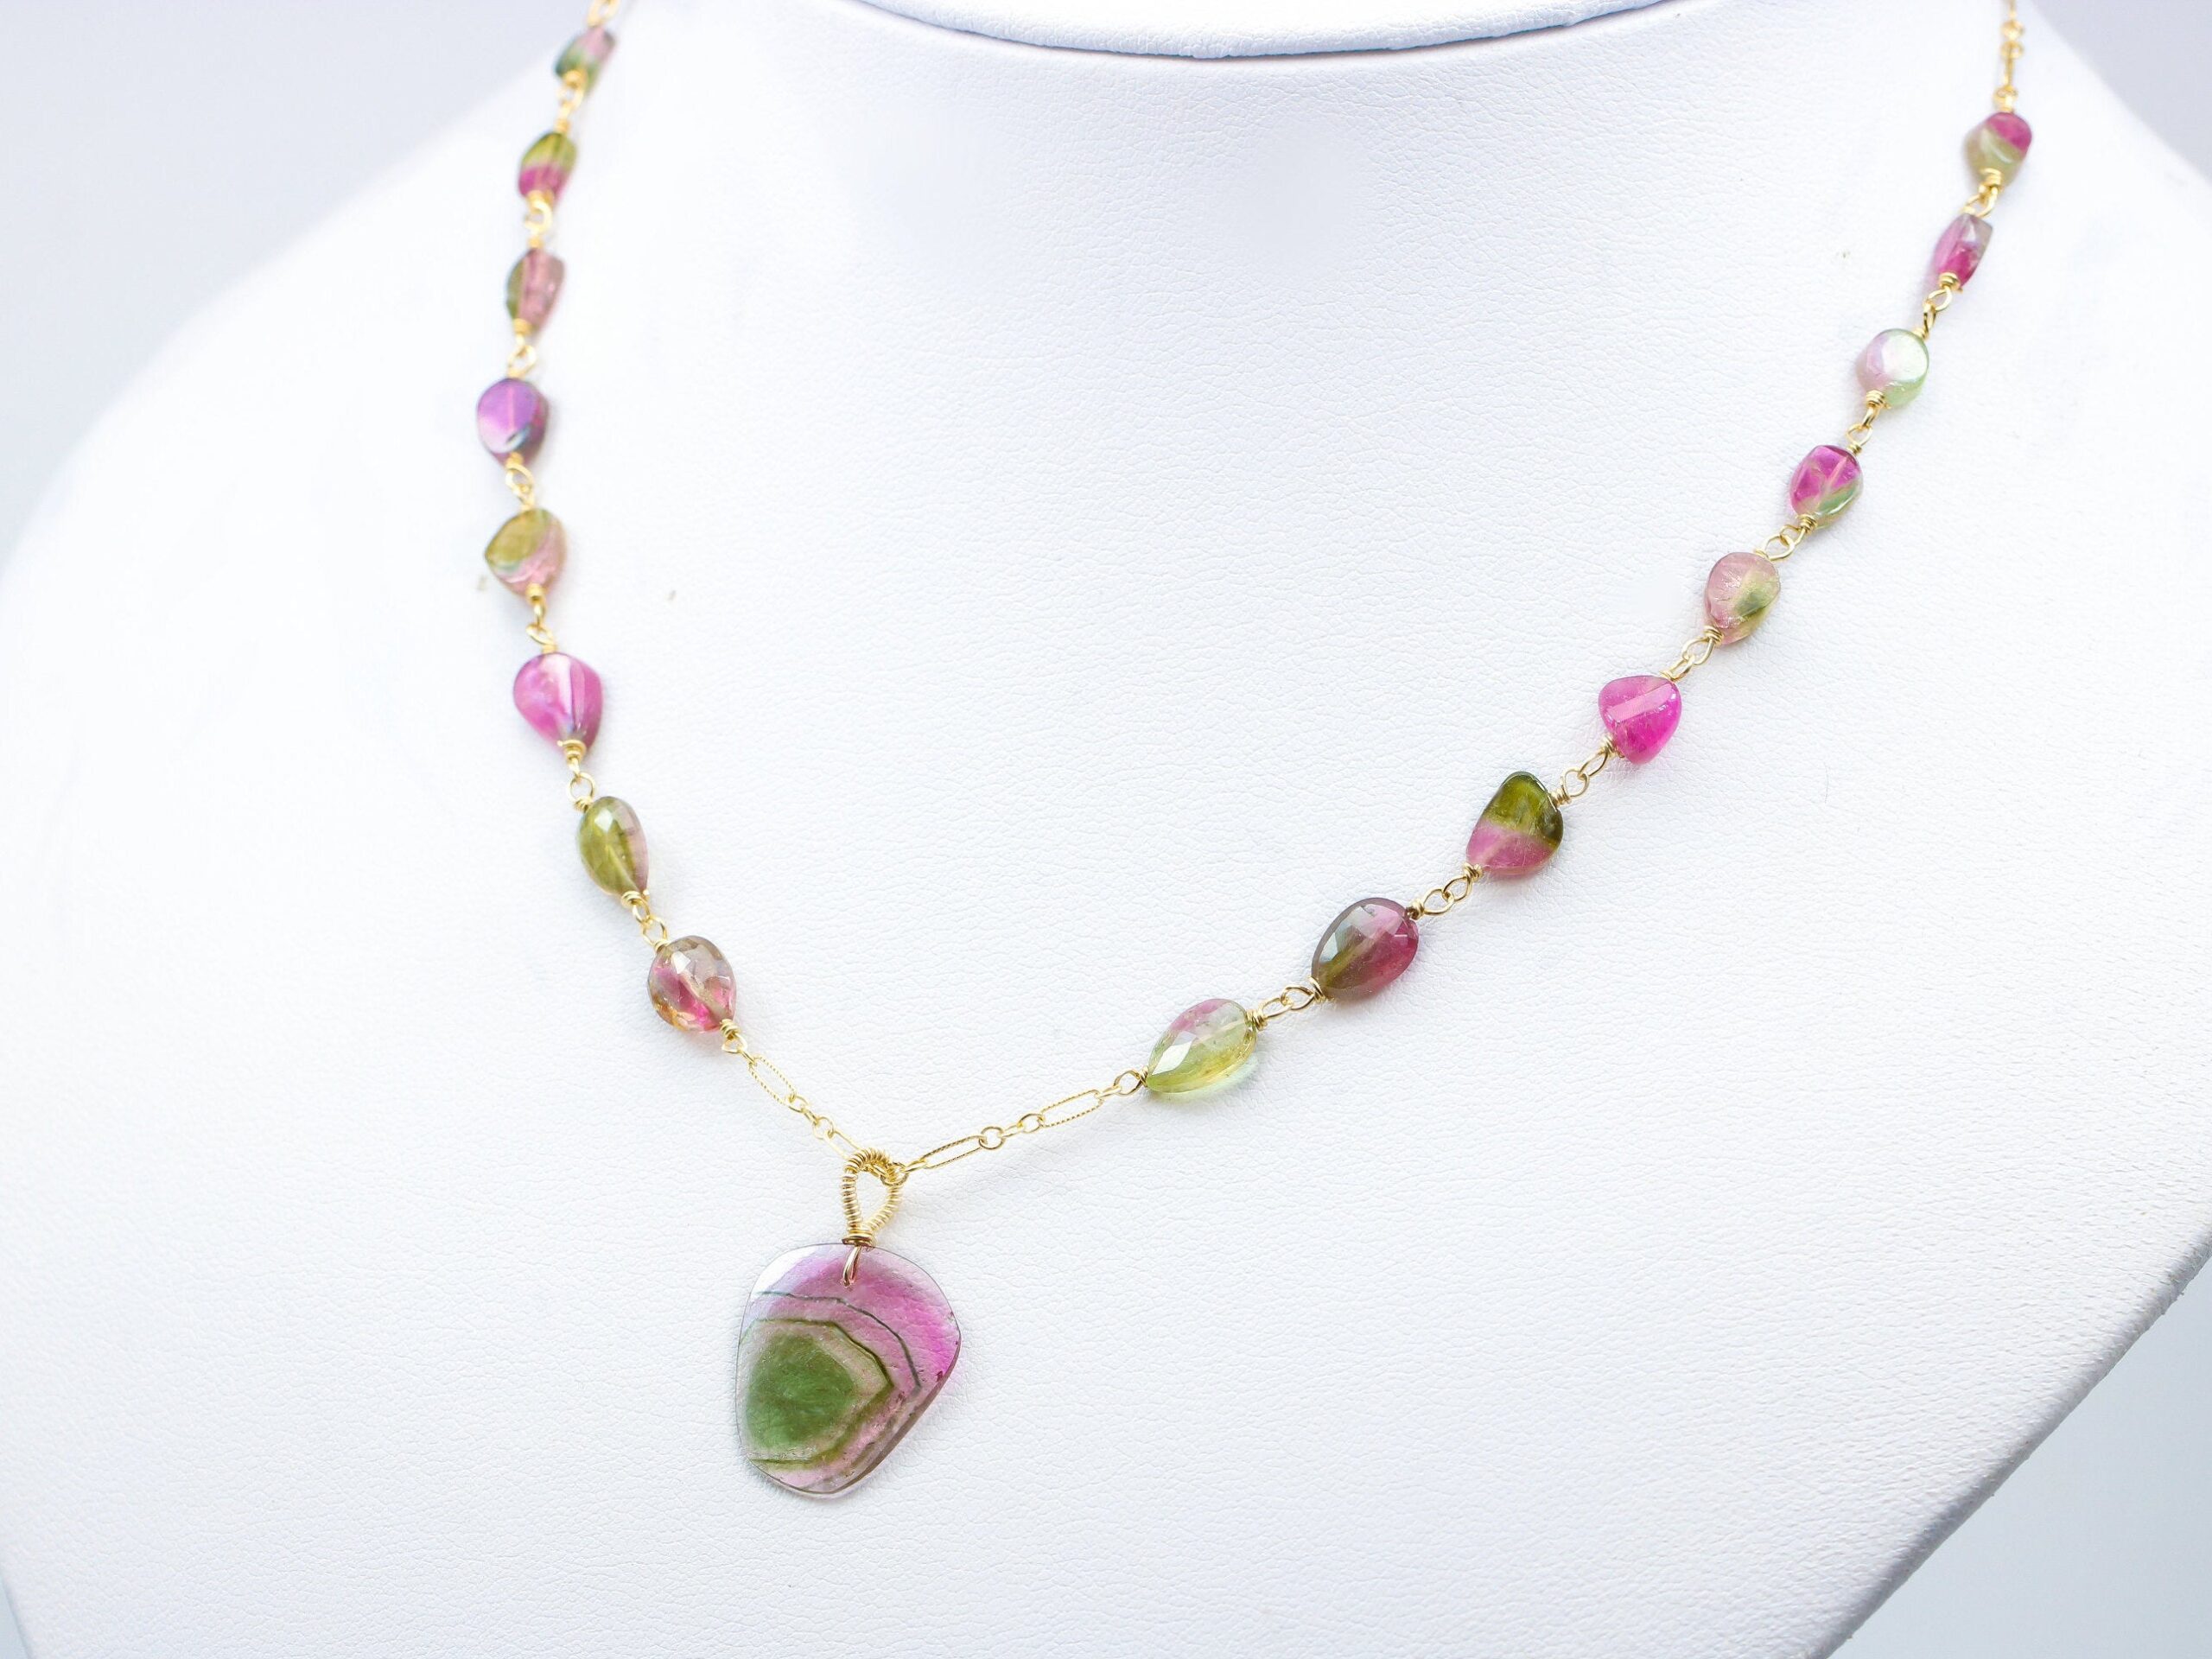 Watermelon Tourmaline Slice Necklace Wire Wrapped in Gold Filled, Statement Necklace One of a Kind